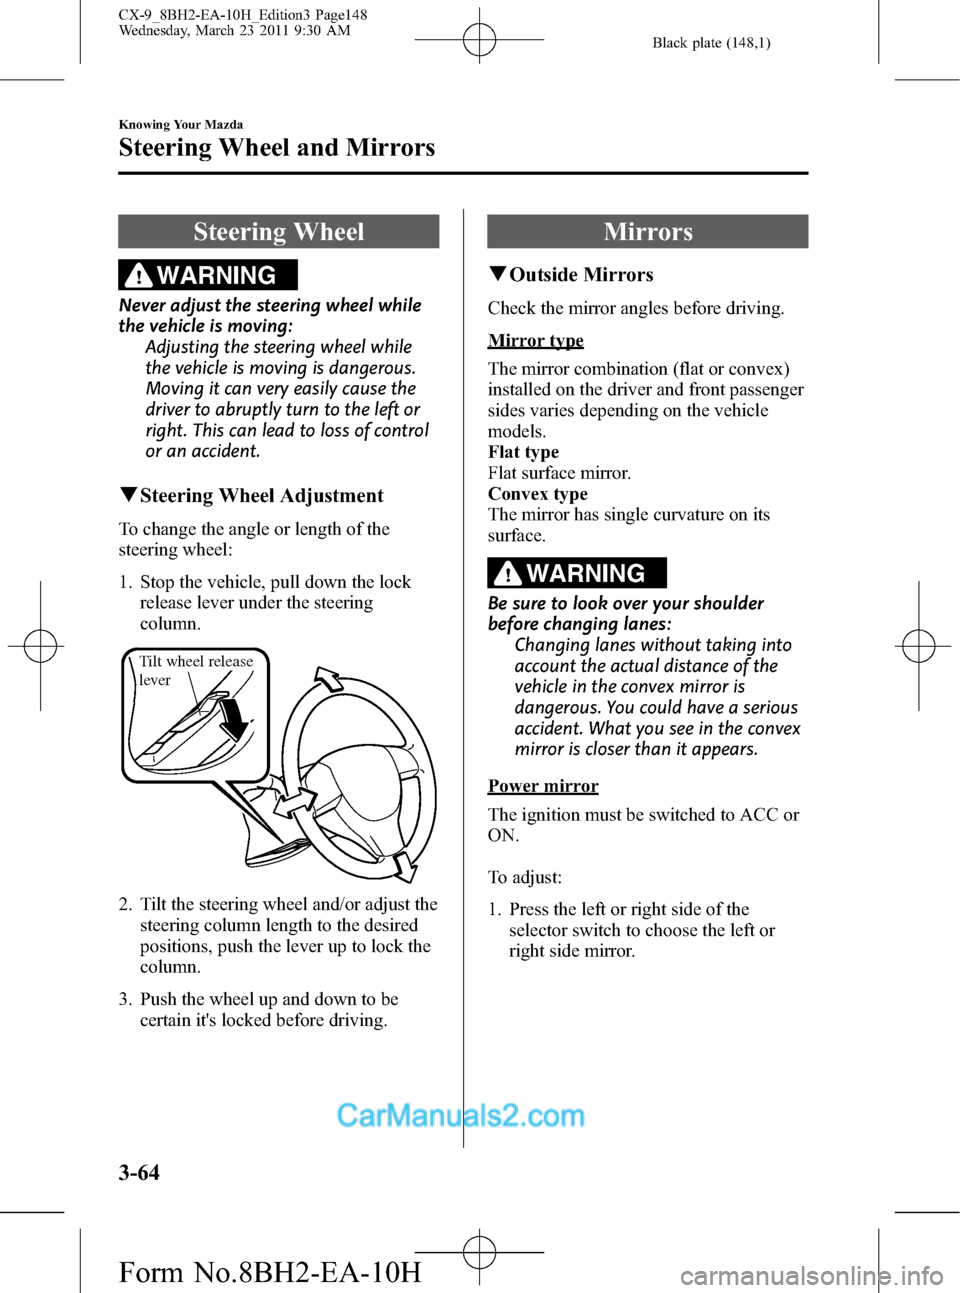 MAZDA MODEL CX-9 2011  Owners Manual (in English) Black plate (148,1)
Steering Wheel
WARNING
Never adjust the steering wheel while
the vehicle is moving:
Adjusting the steering wheel while
the vehicle is moving is dangerous.
Moving it can very easily